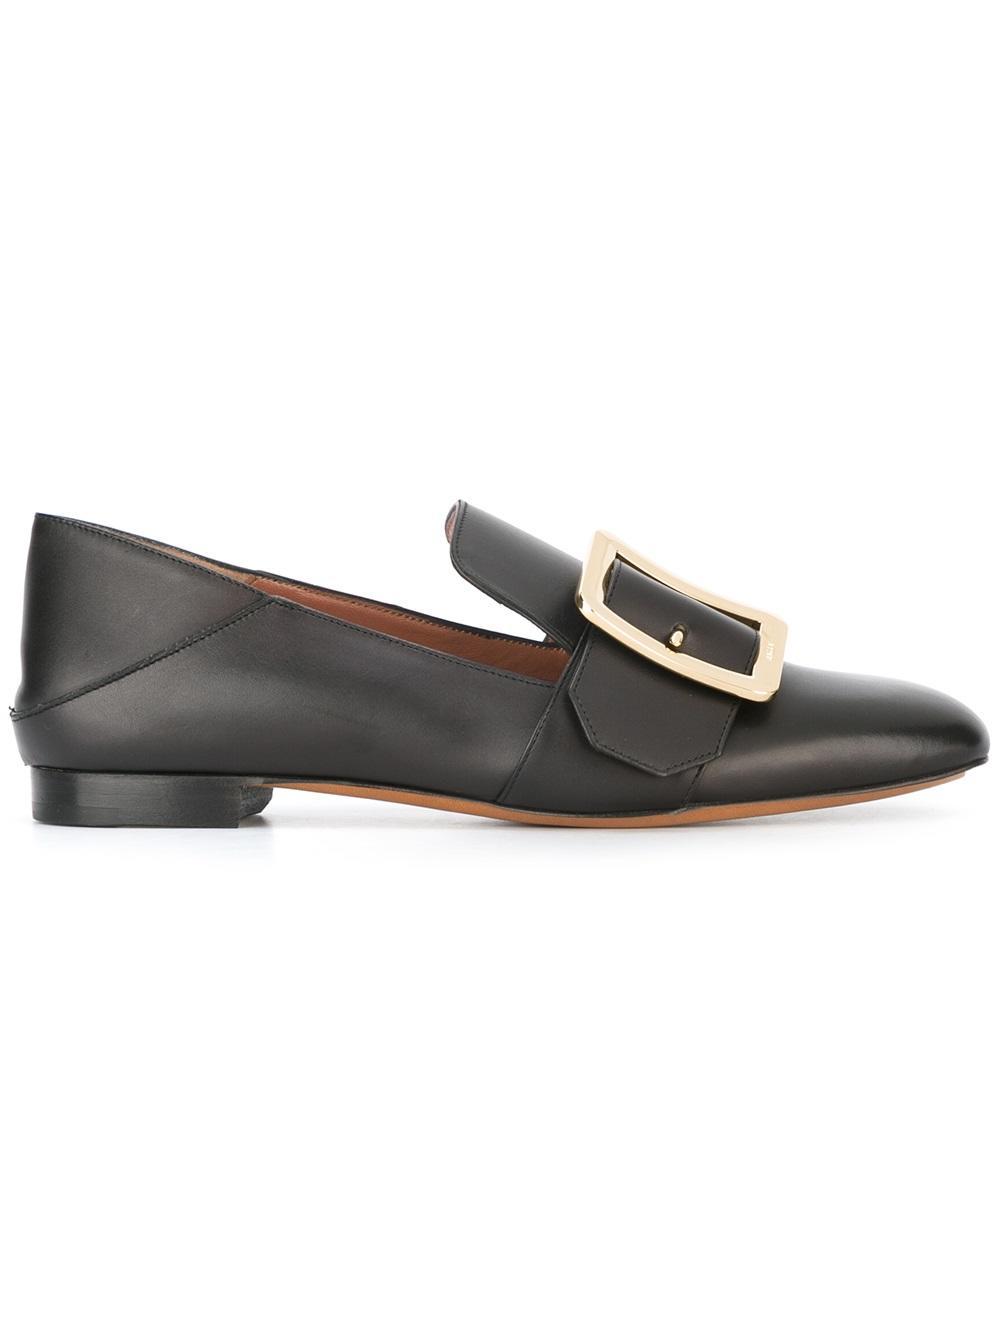 Lyst - Bally Buckle Loafers in Black